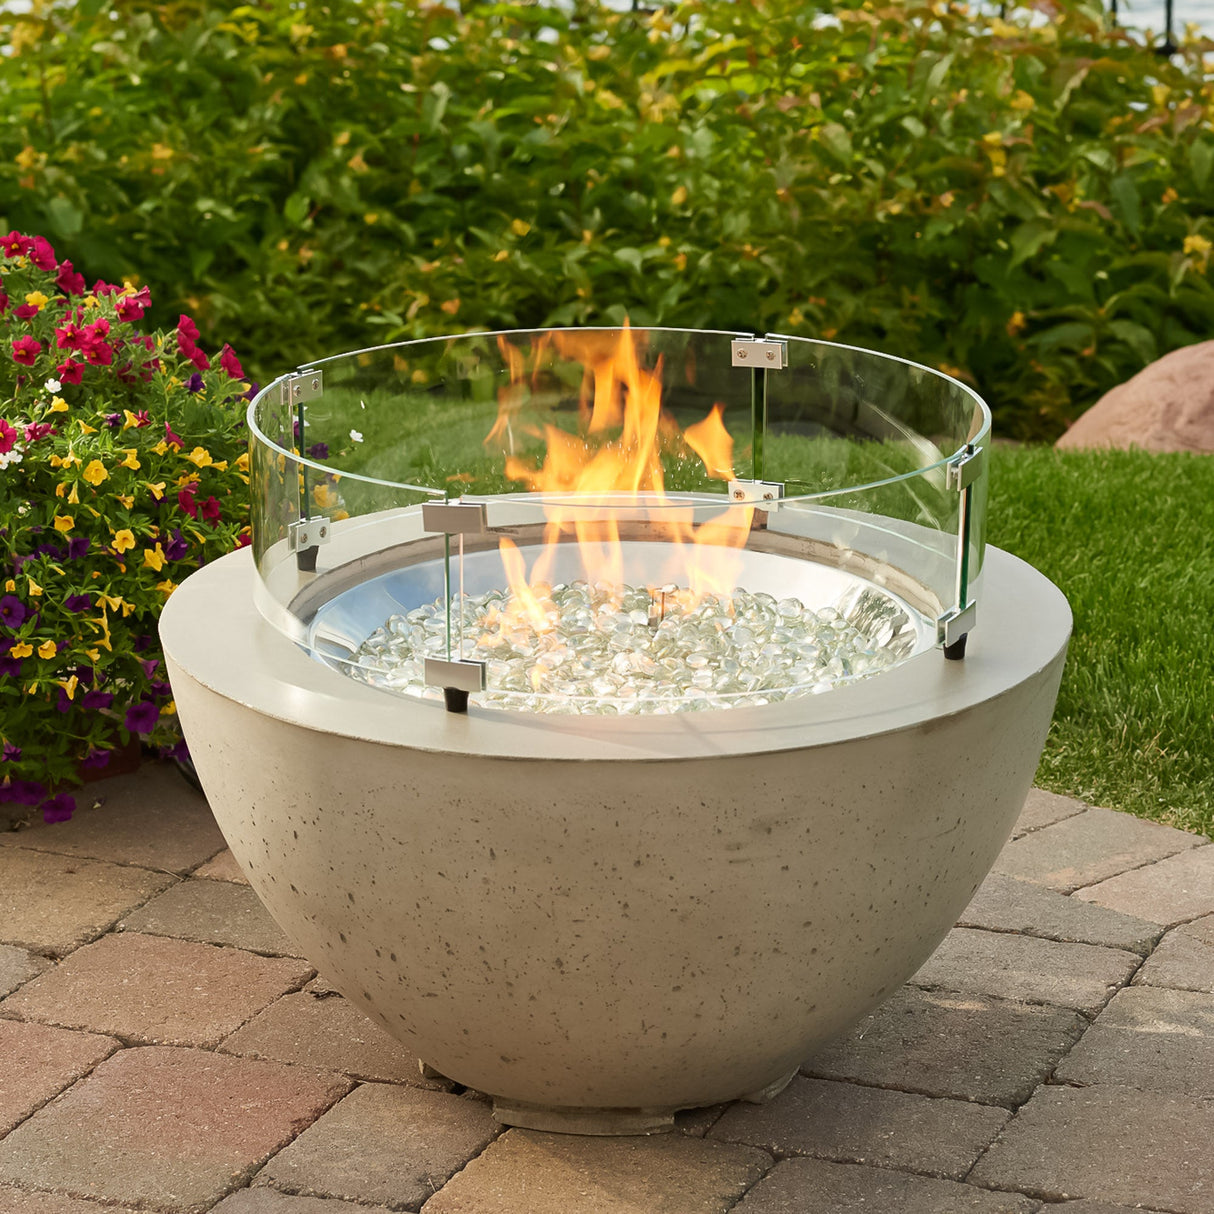 A glass wind guard on a Cove Round Gas Fire Pit Bowl 29" while in an outdoor space